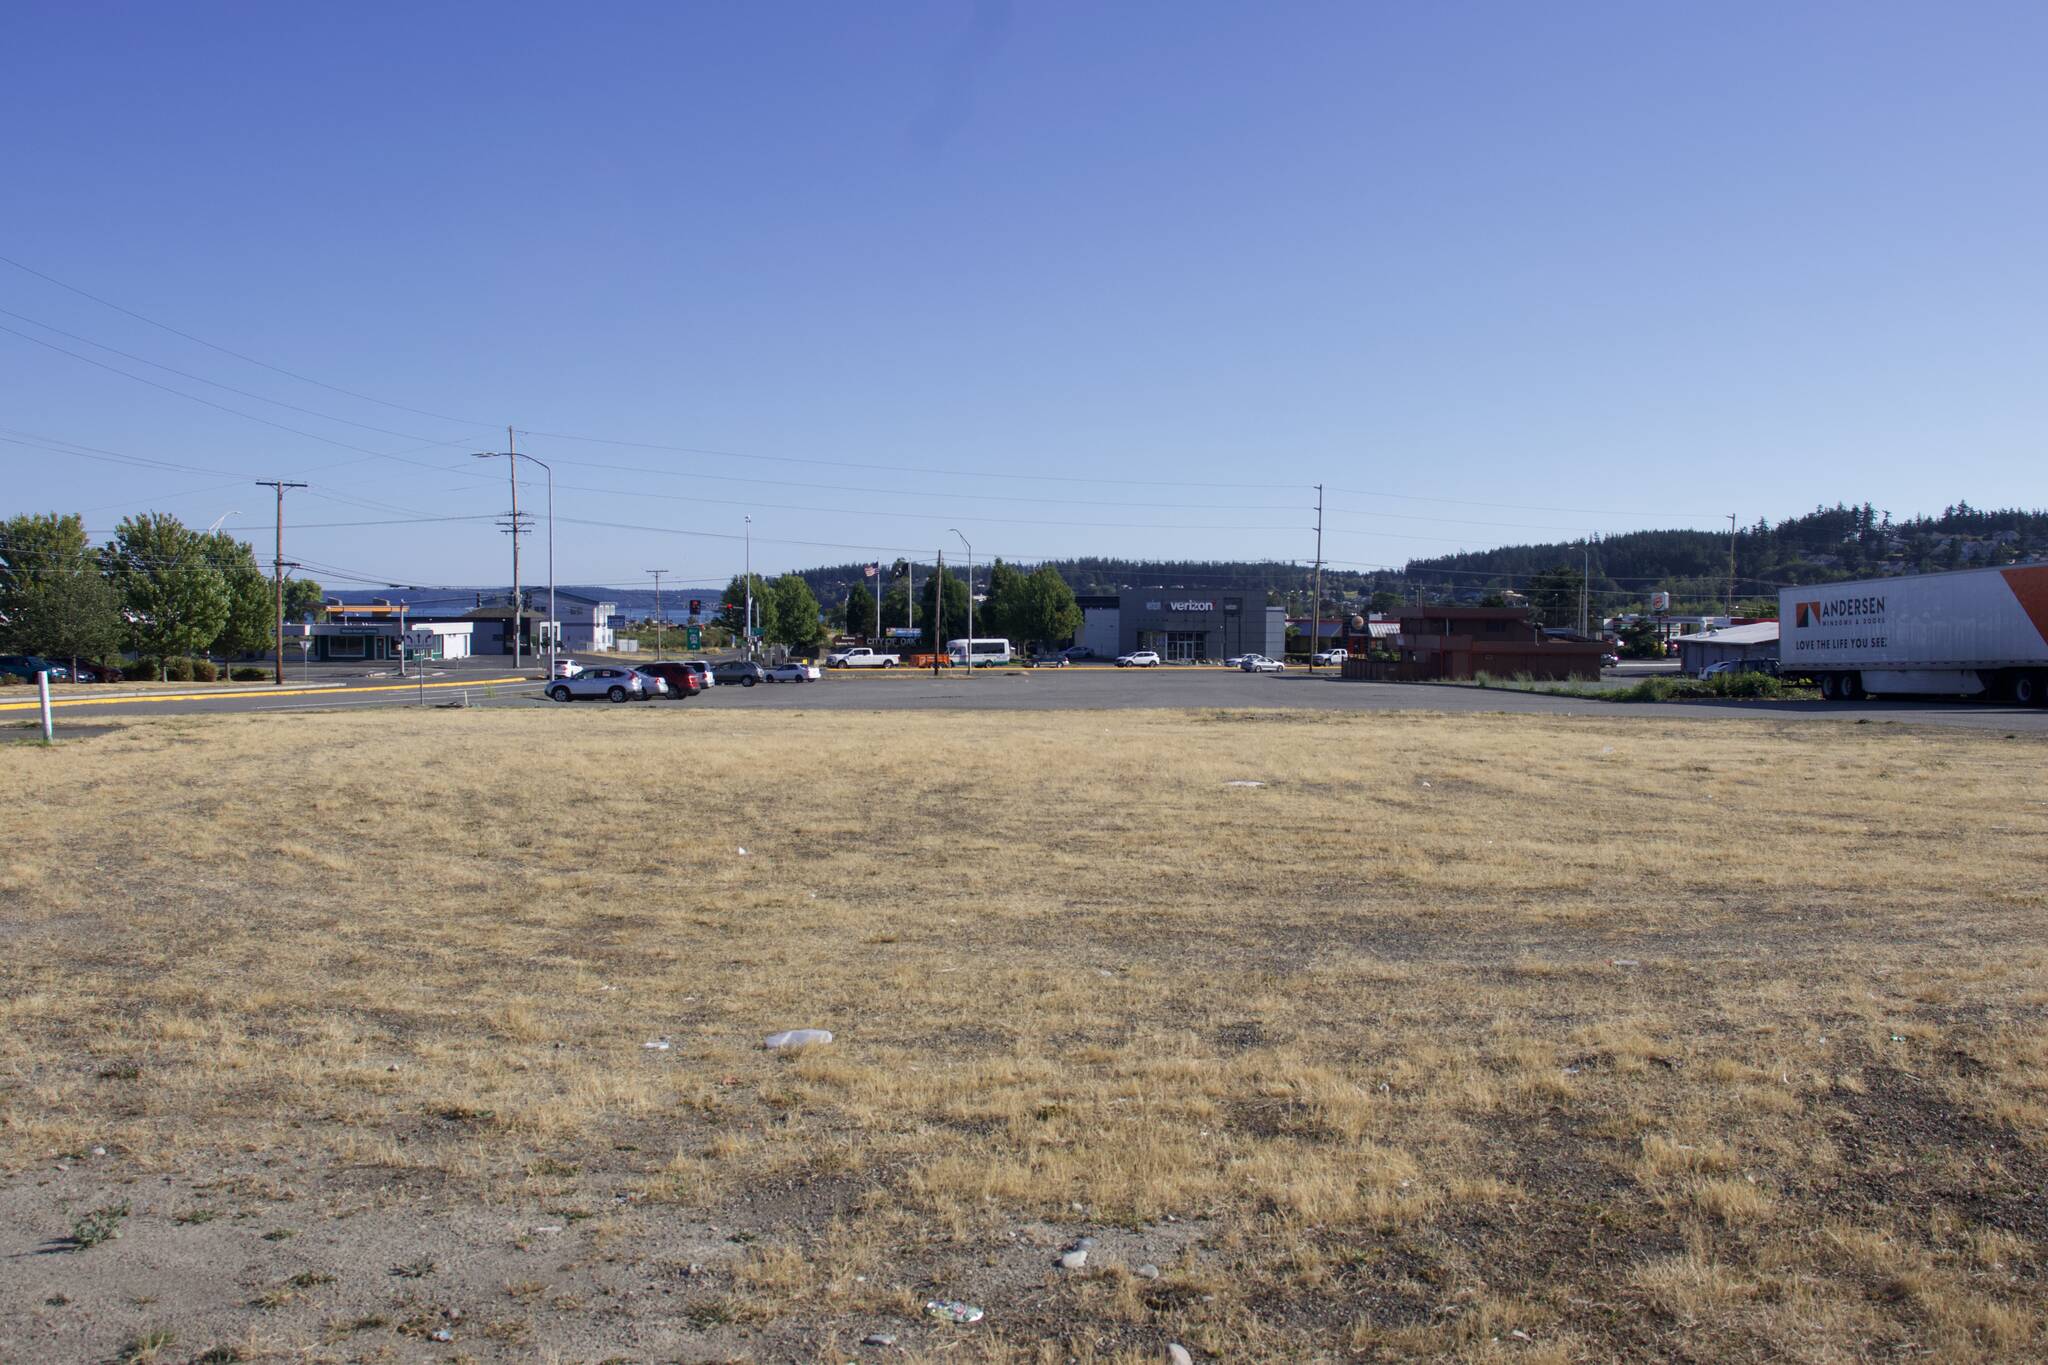 The lot on the corner State Route 20 and Piooner Way has been vacant since 2011. (Photo by Rachel Rosen/Whidbey News-Times)